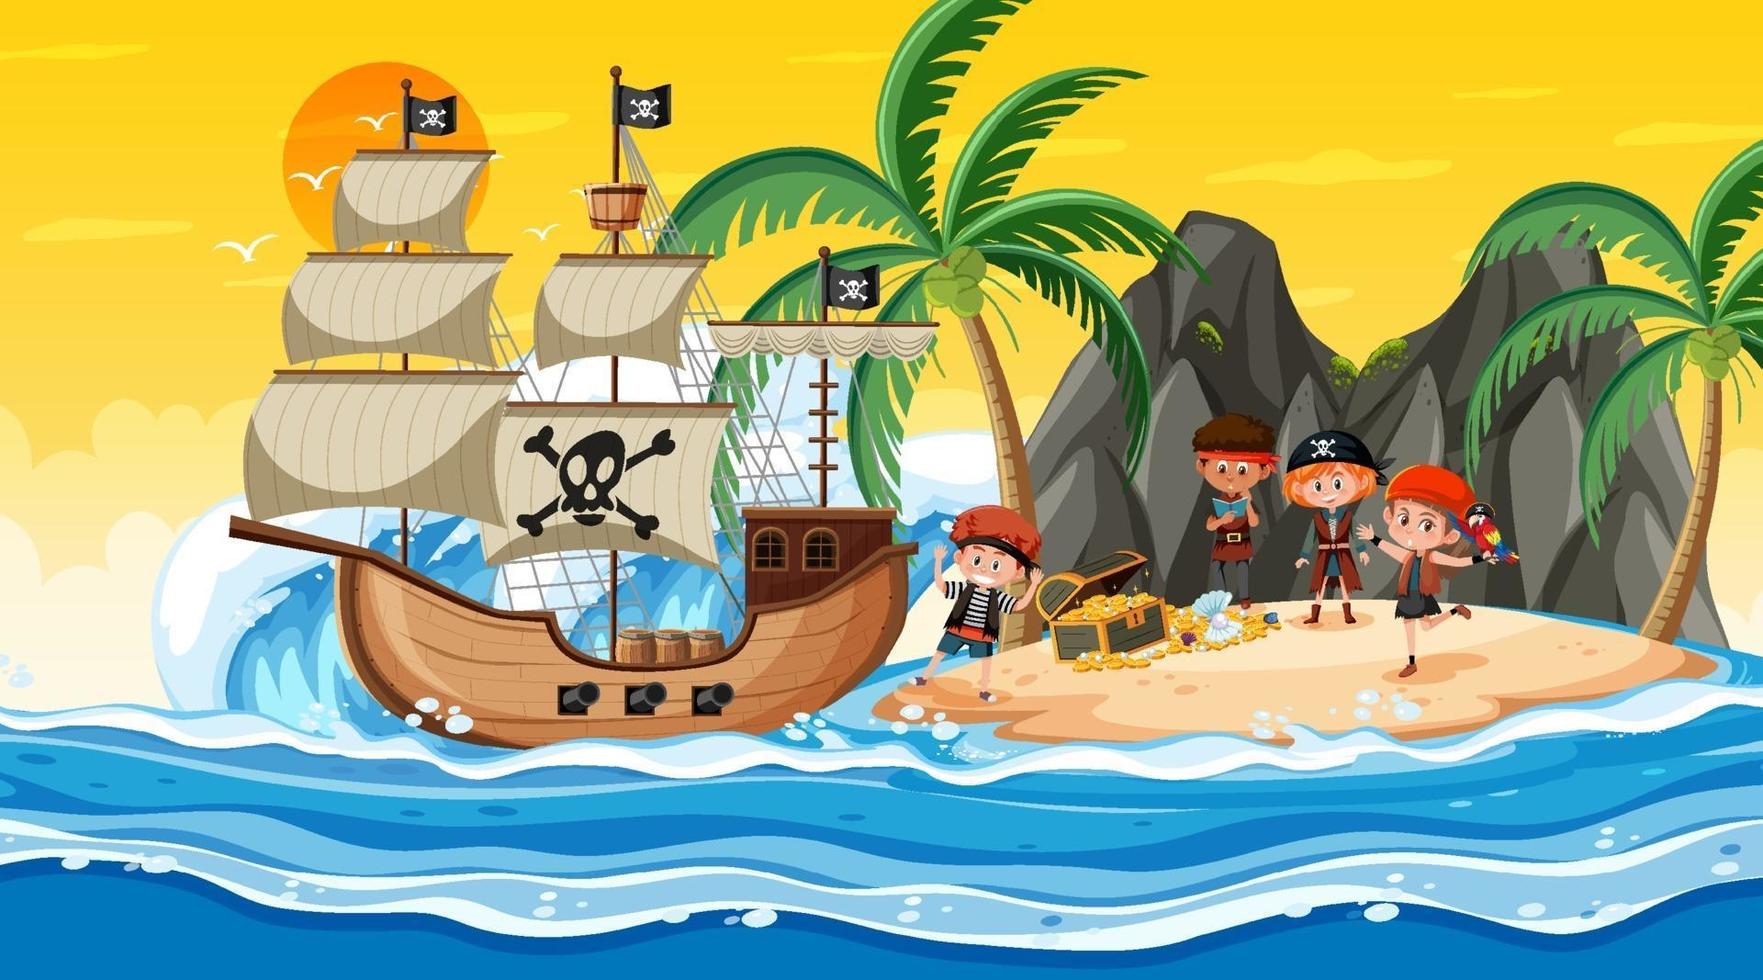 Treasure Island scene at sunset time with Pirate kids vector